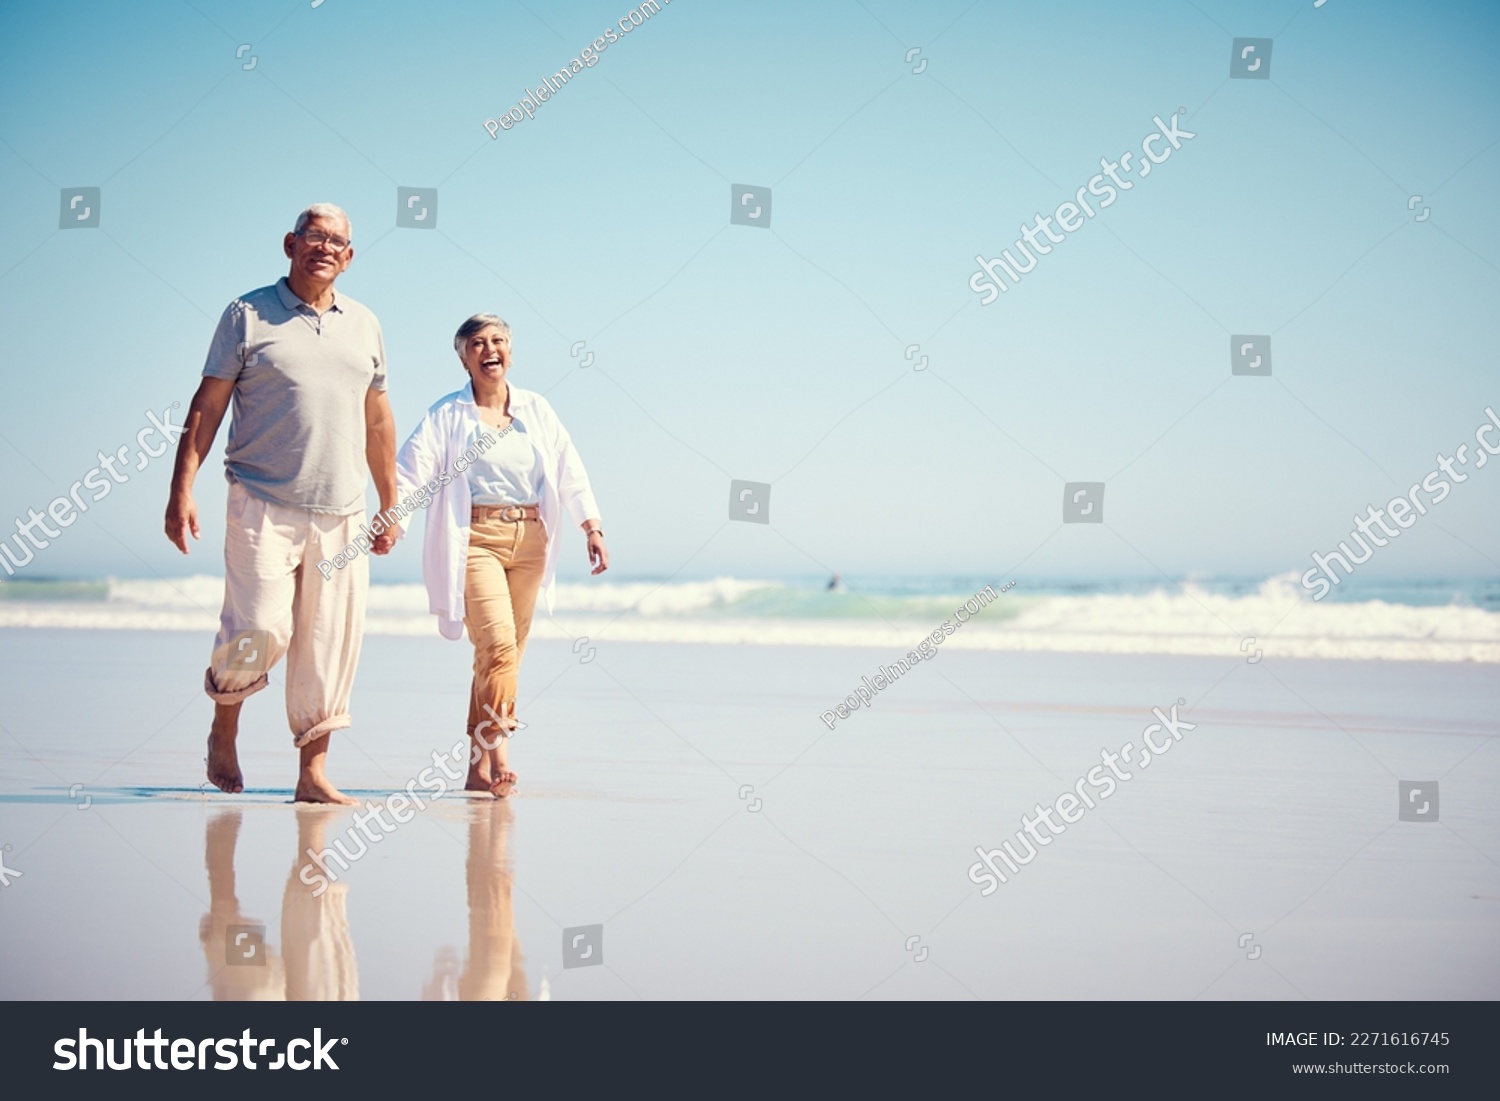 Holding hands, summer and an old couple walking on the beach with a blue sky mockup background. Love, romance or mock up with a senior man and woman taking a walk on the sand by the ocean or sea #2271616745